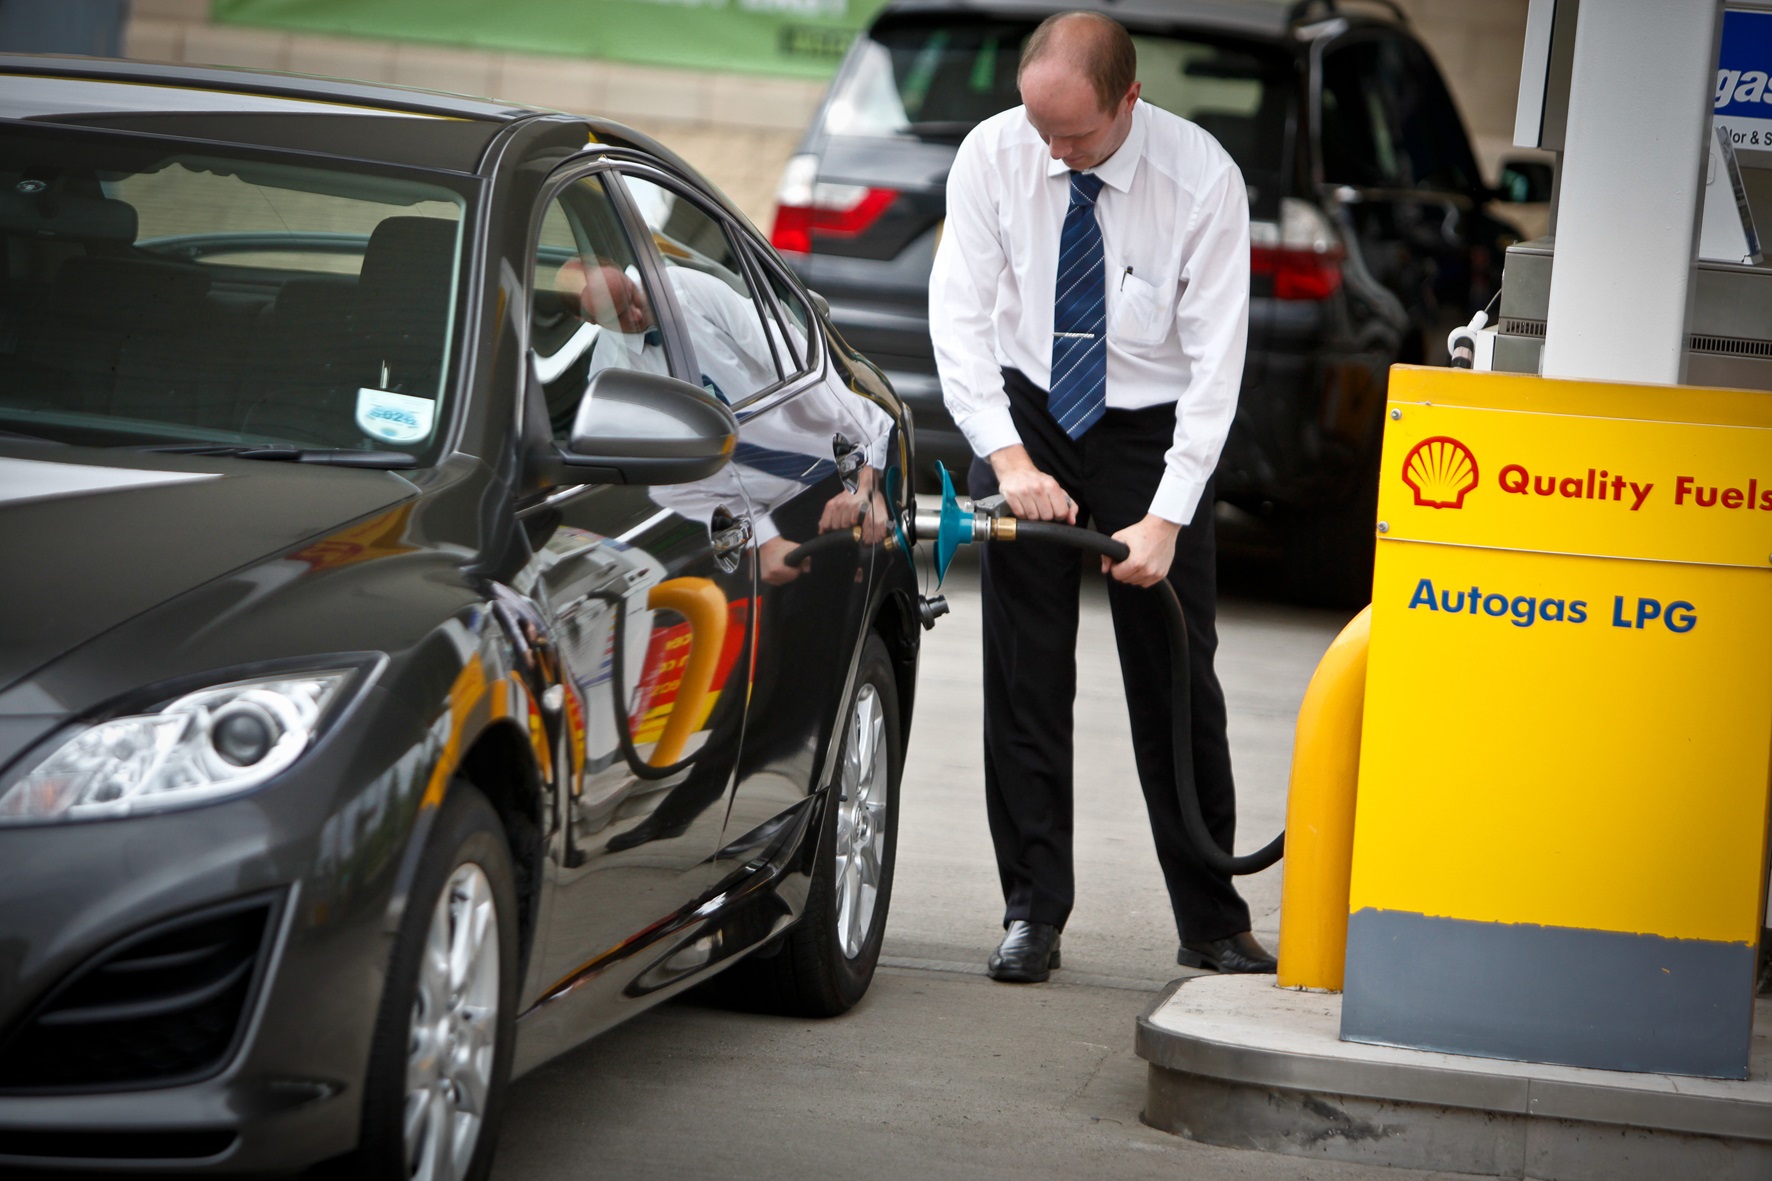 Is it really dangerous to use a mobile phone while refuelling?